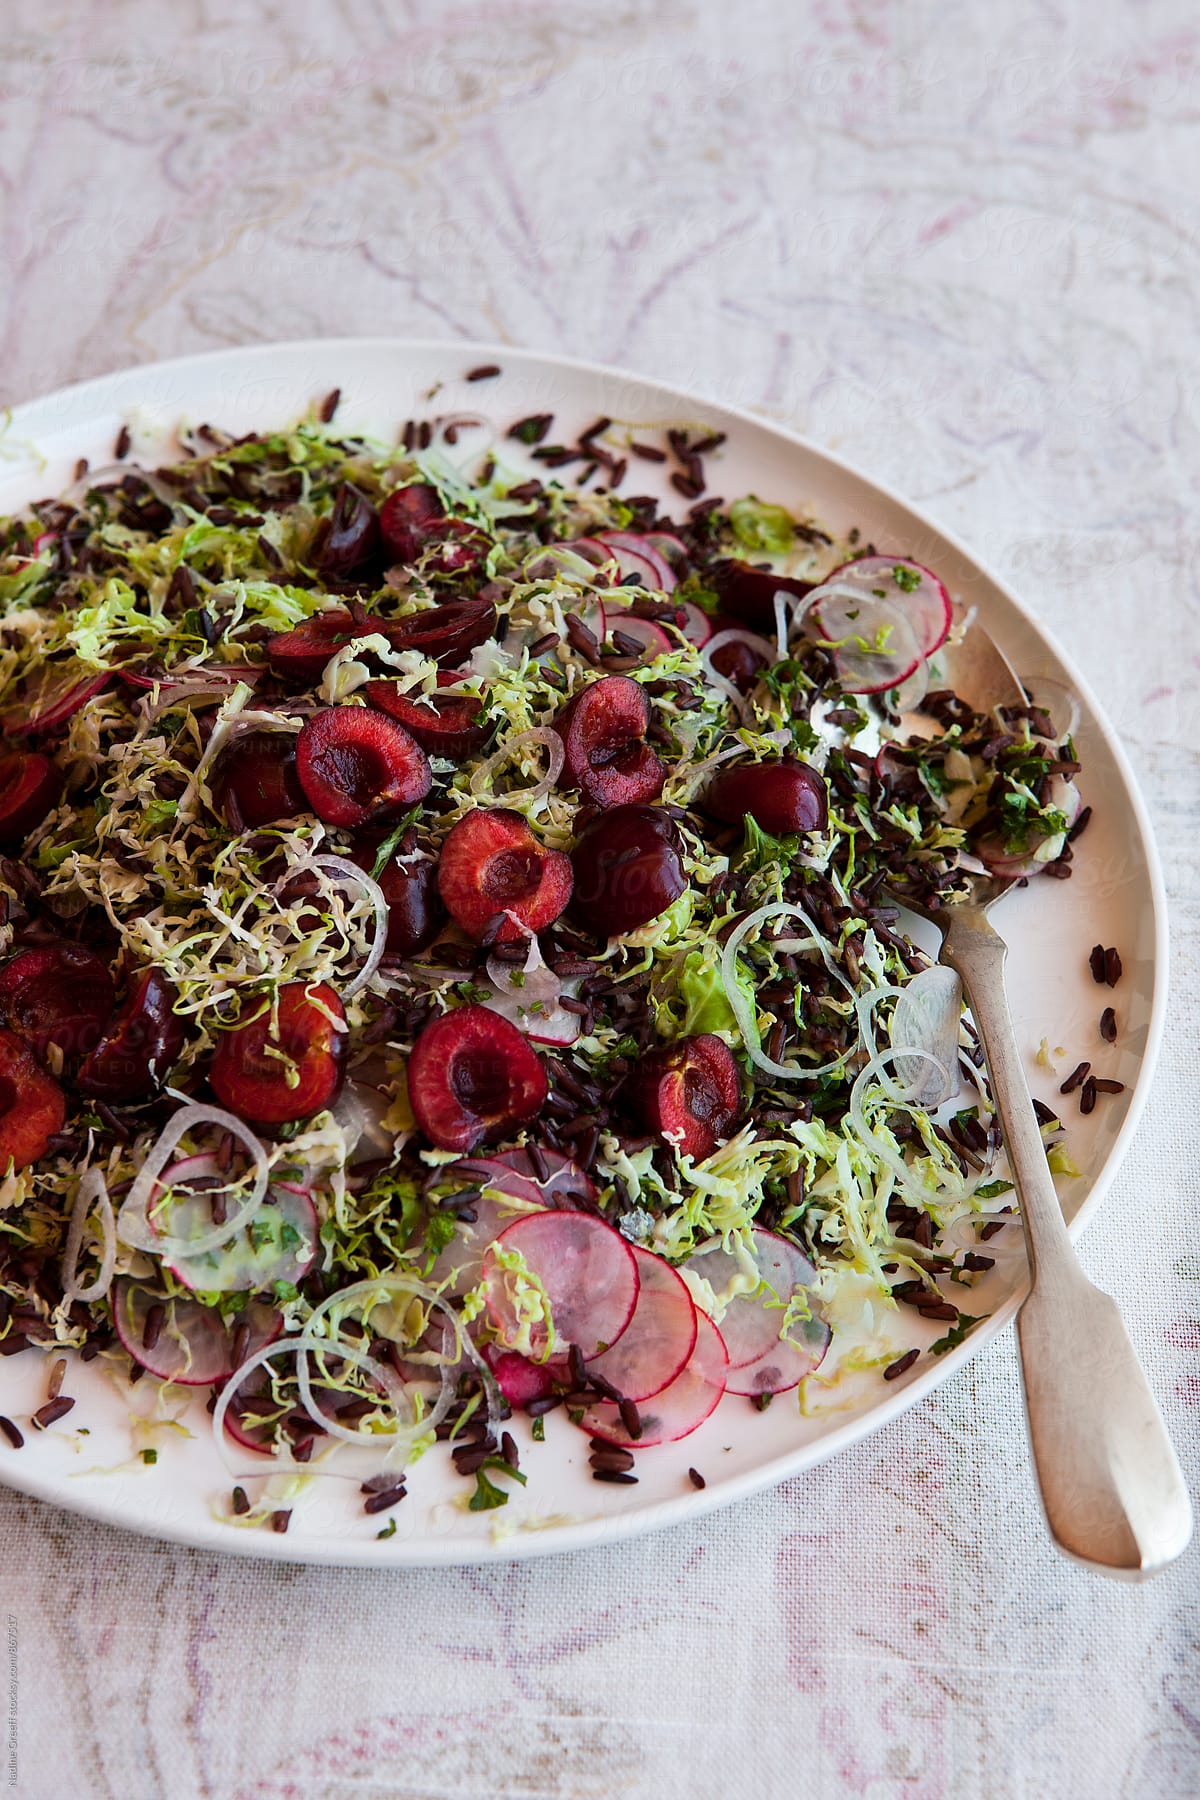 Plate of black rice salad with shaved brussel sprouts, cherries, red onion and radish